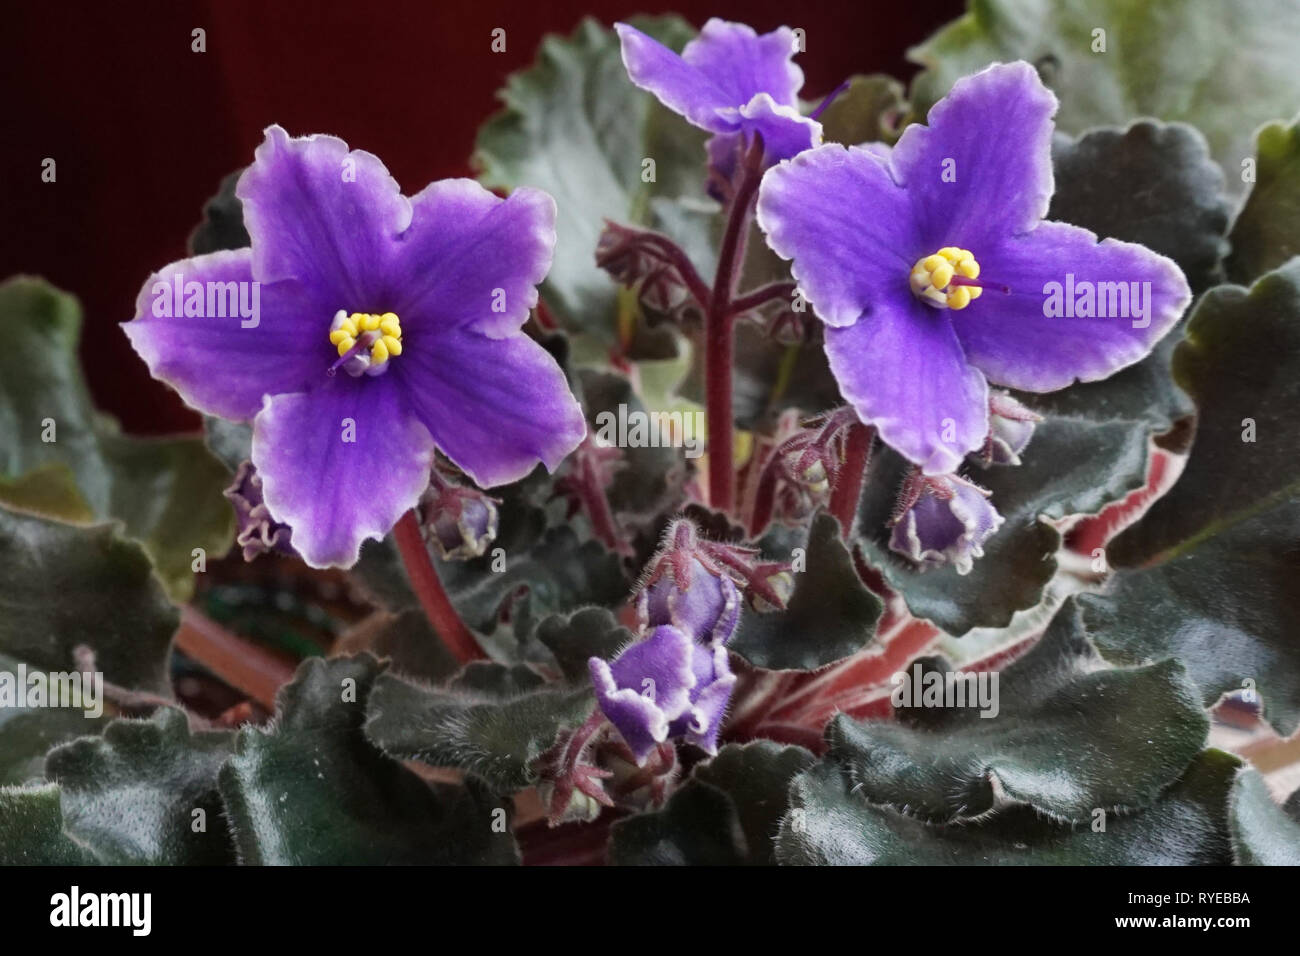 Close-up of the purple flowers of an African Violet (Saintpaulia) Stock Photo